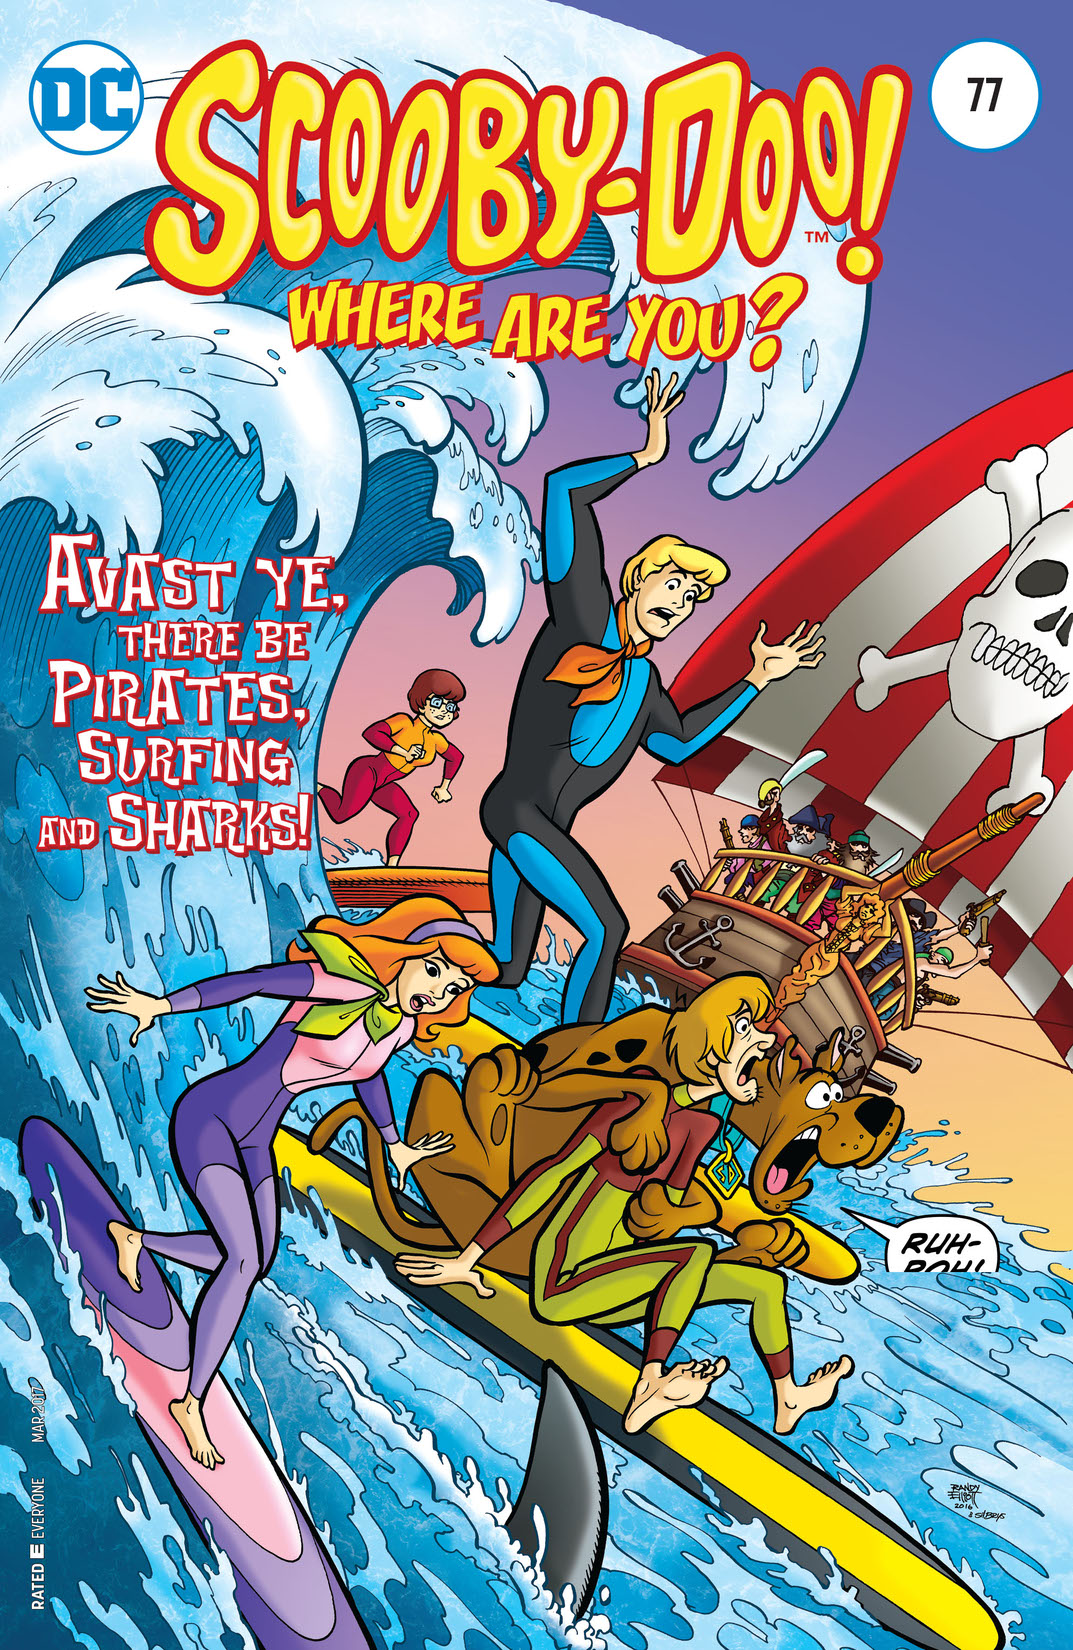 Scooby-Doo, Where Are You? #77 preview images